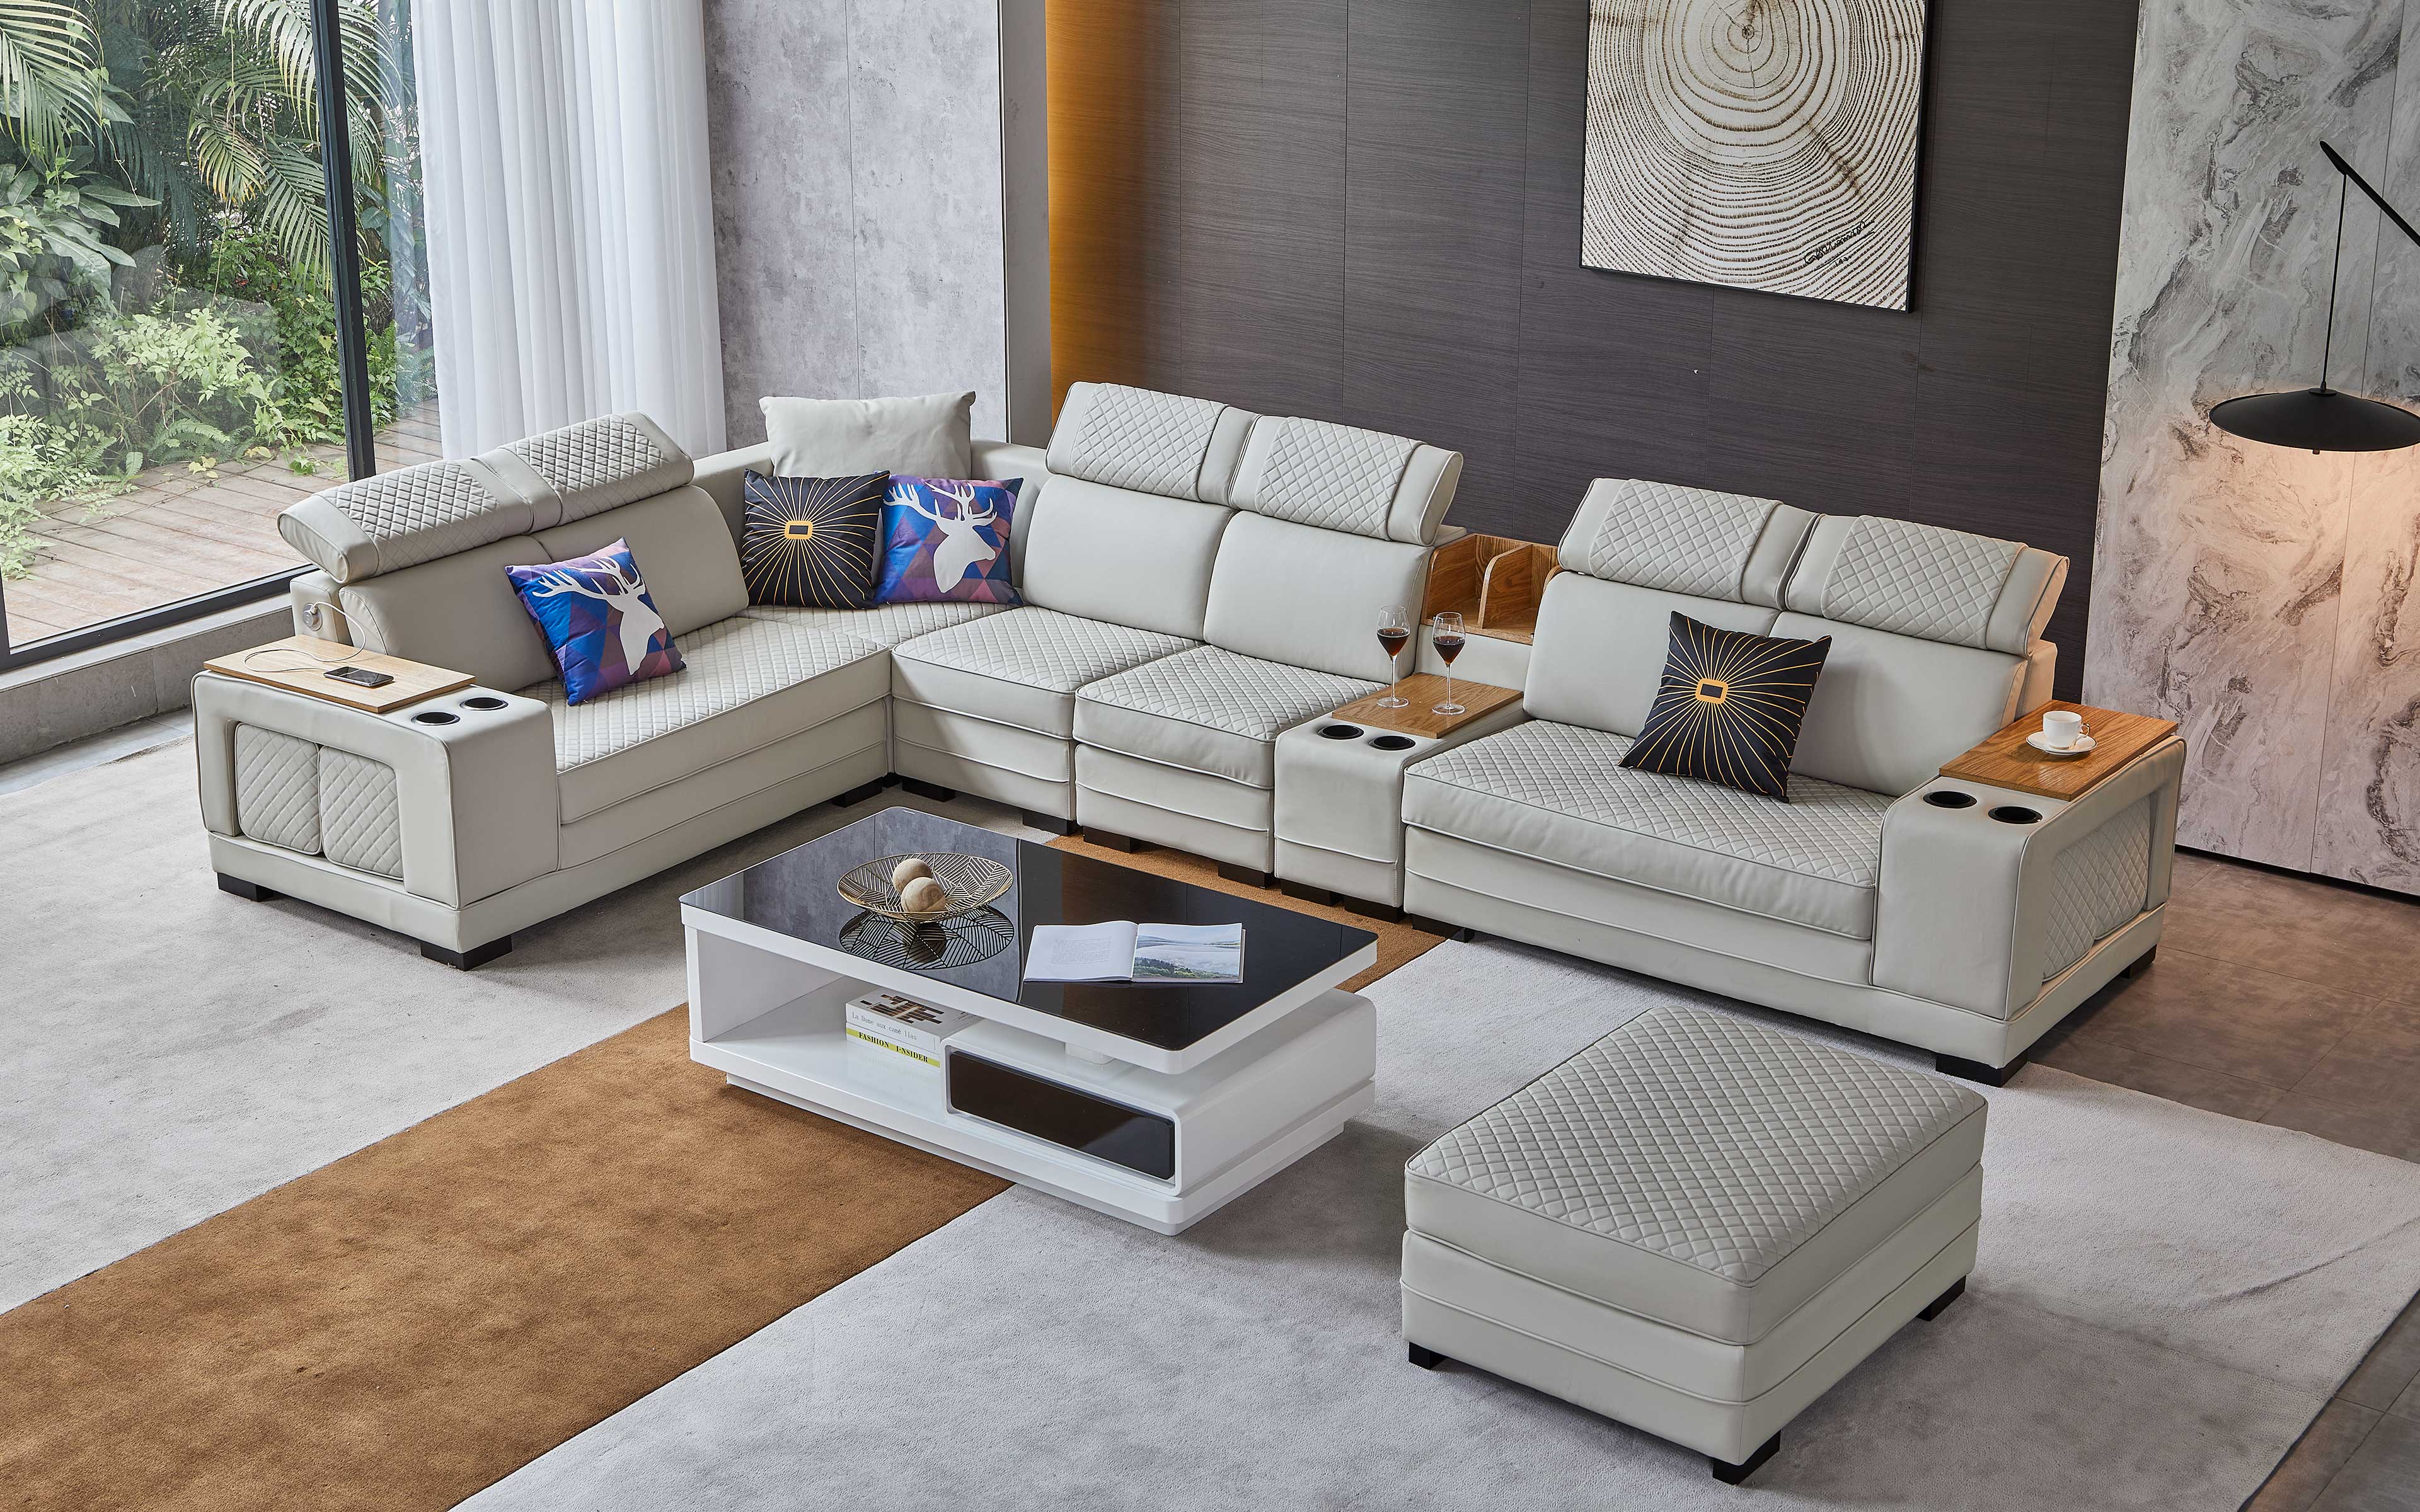 Apus Off-White Modular Tufted Sectional